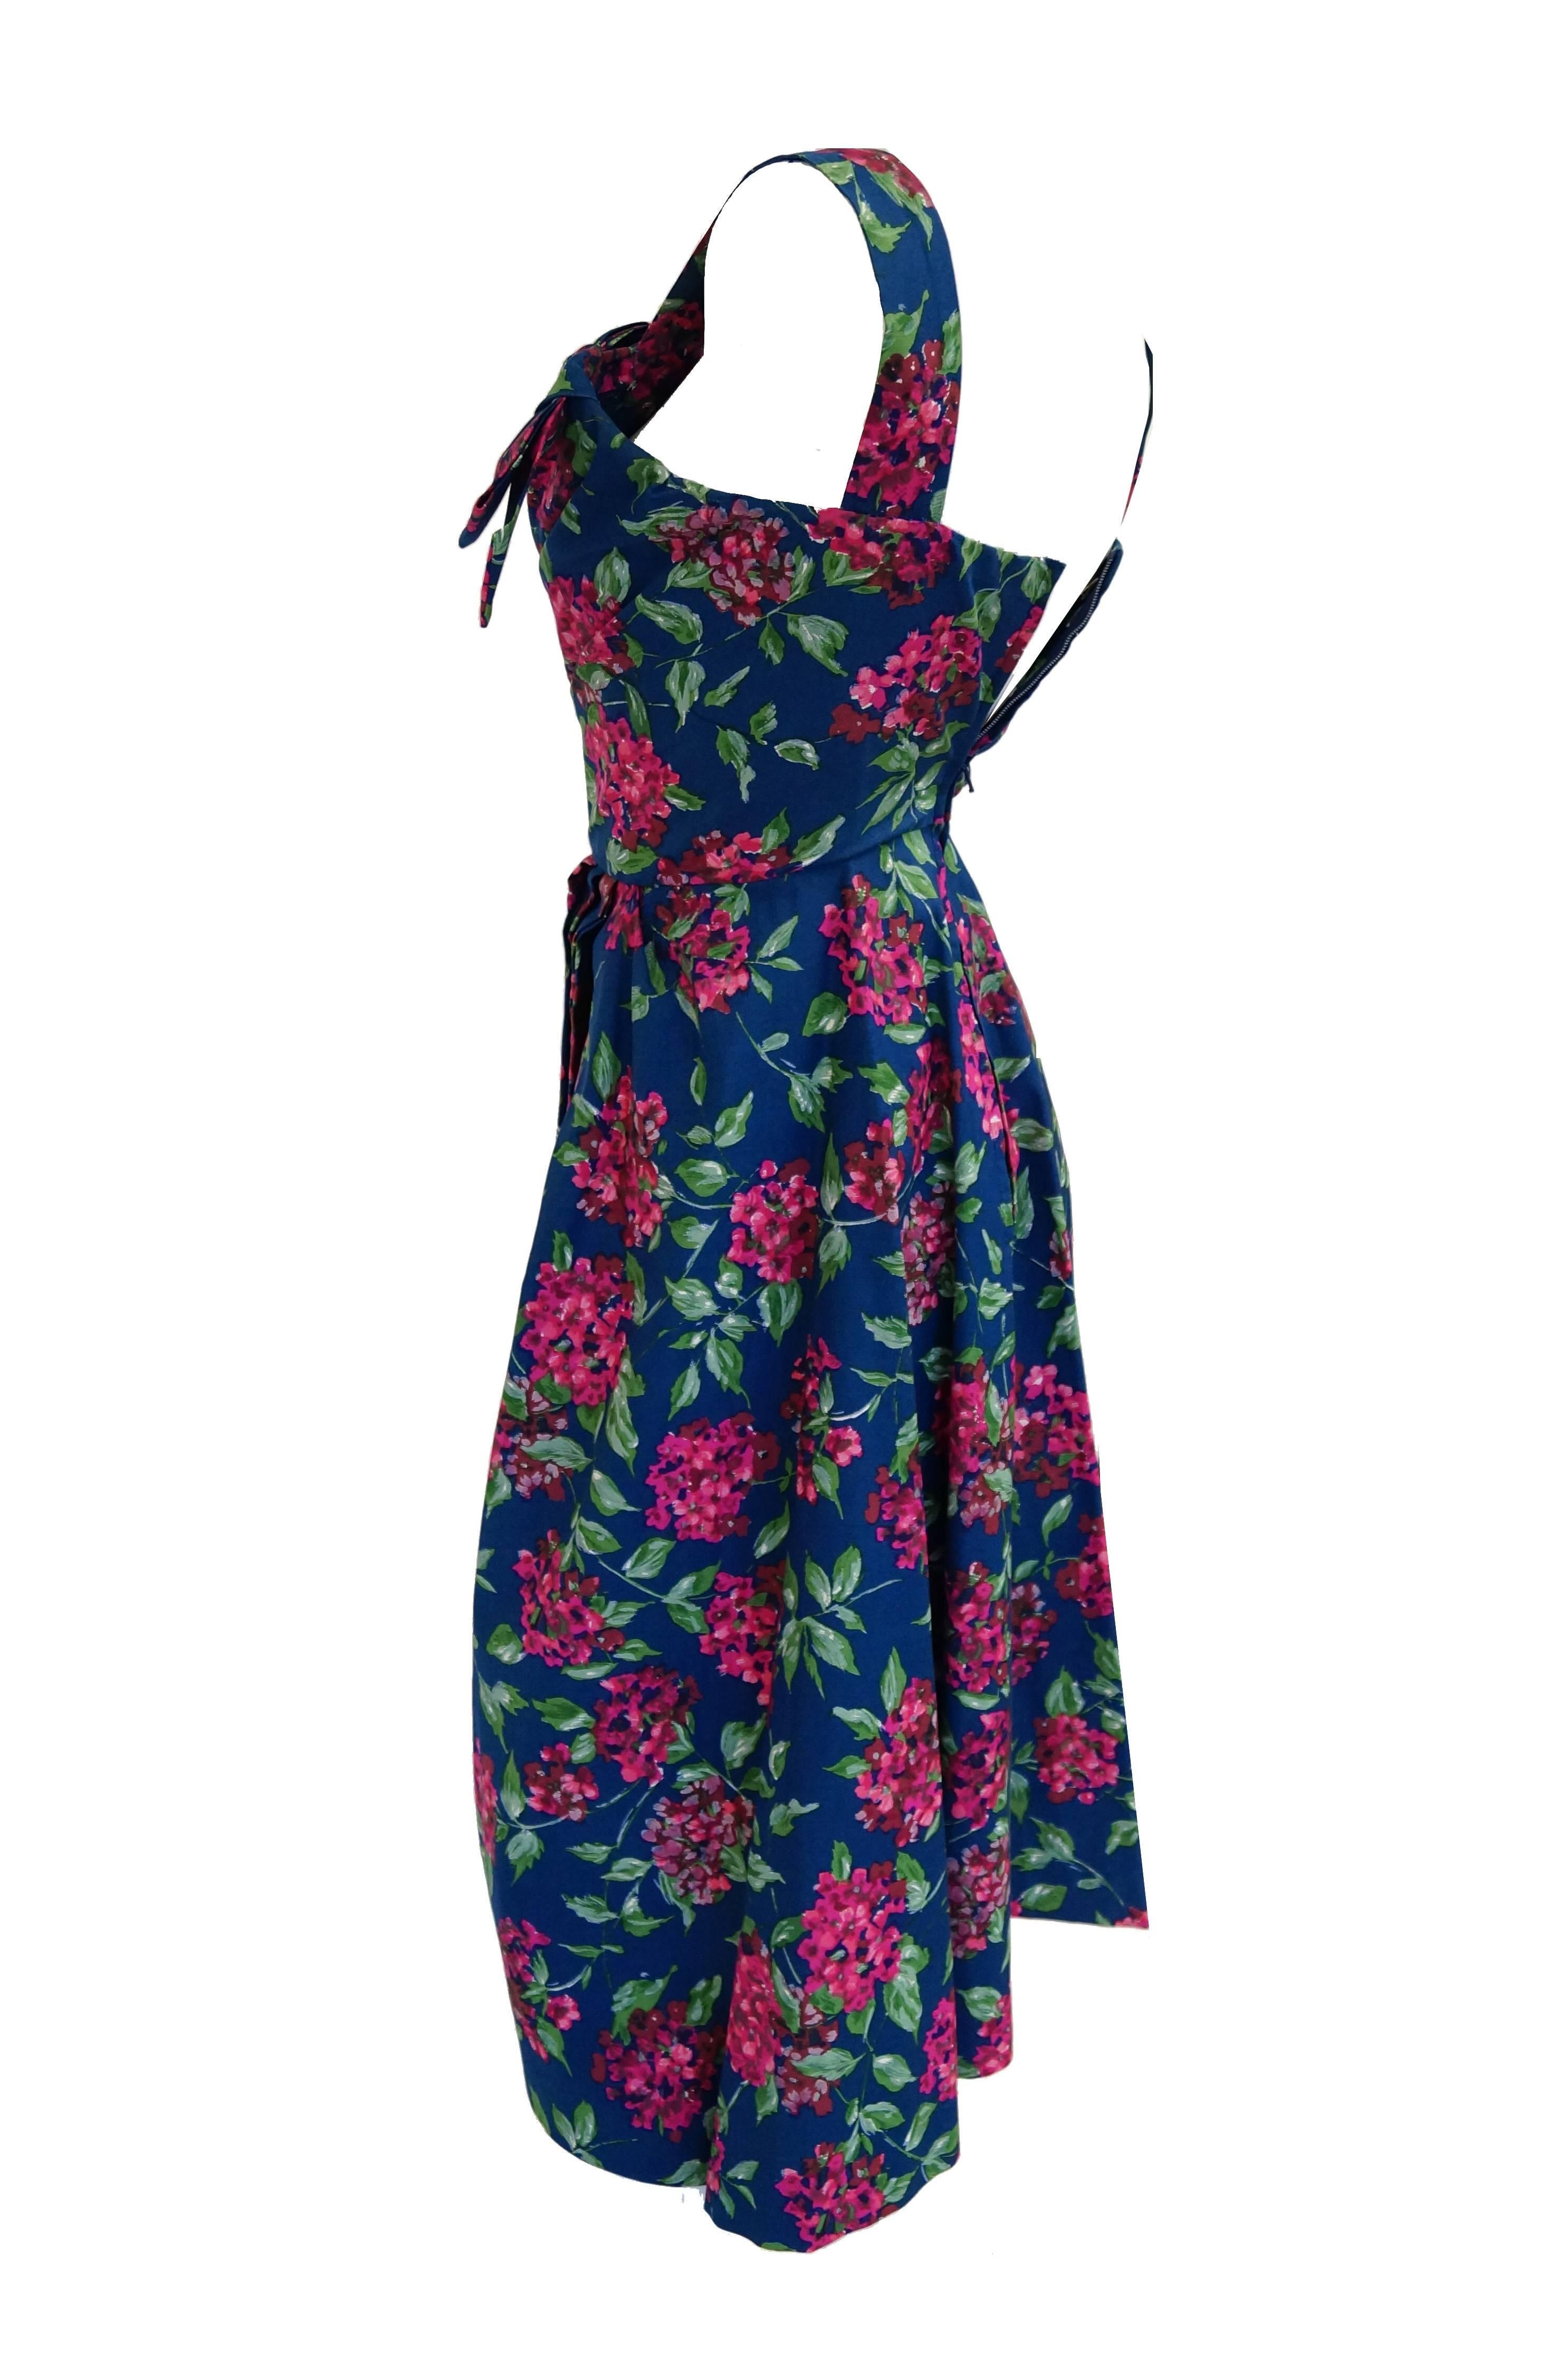 Lovely tailored mid century floral dress by 